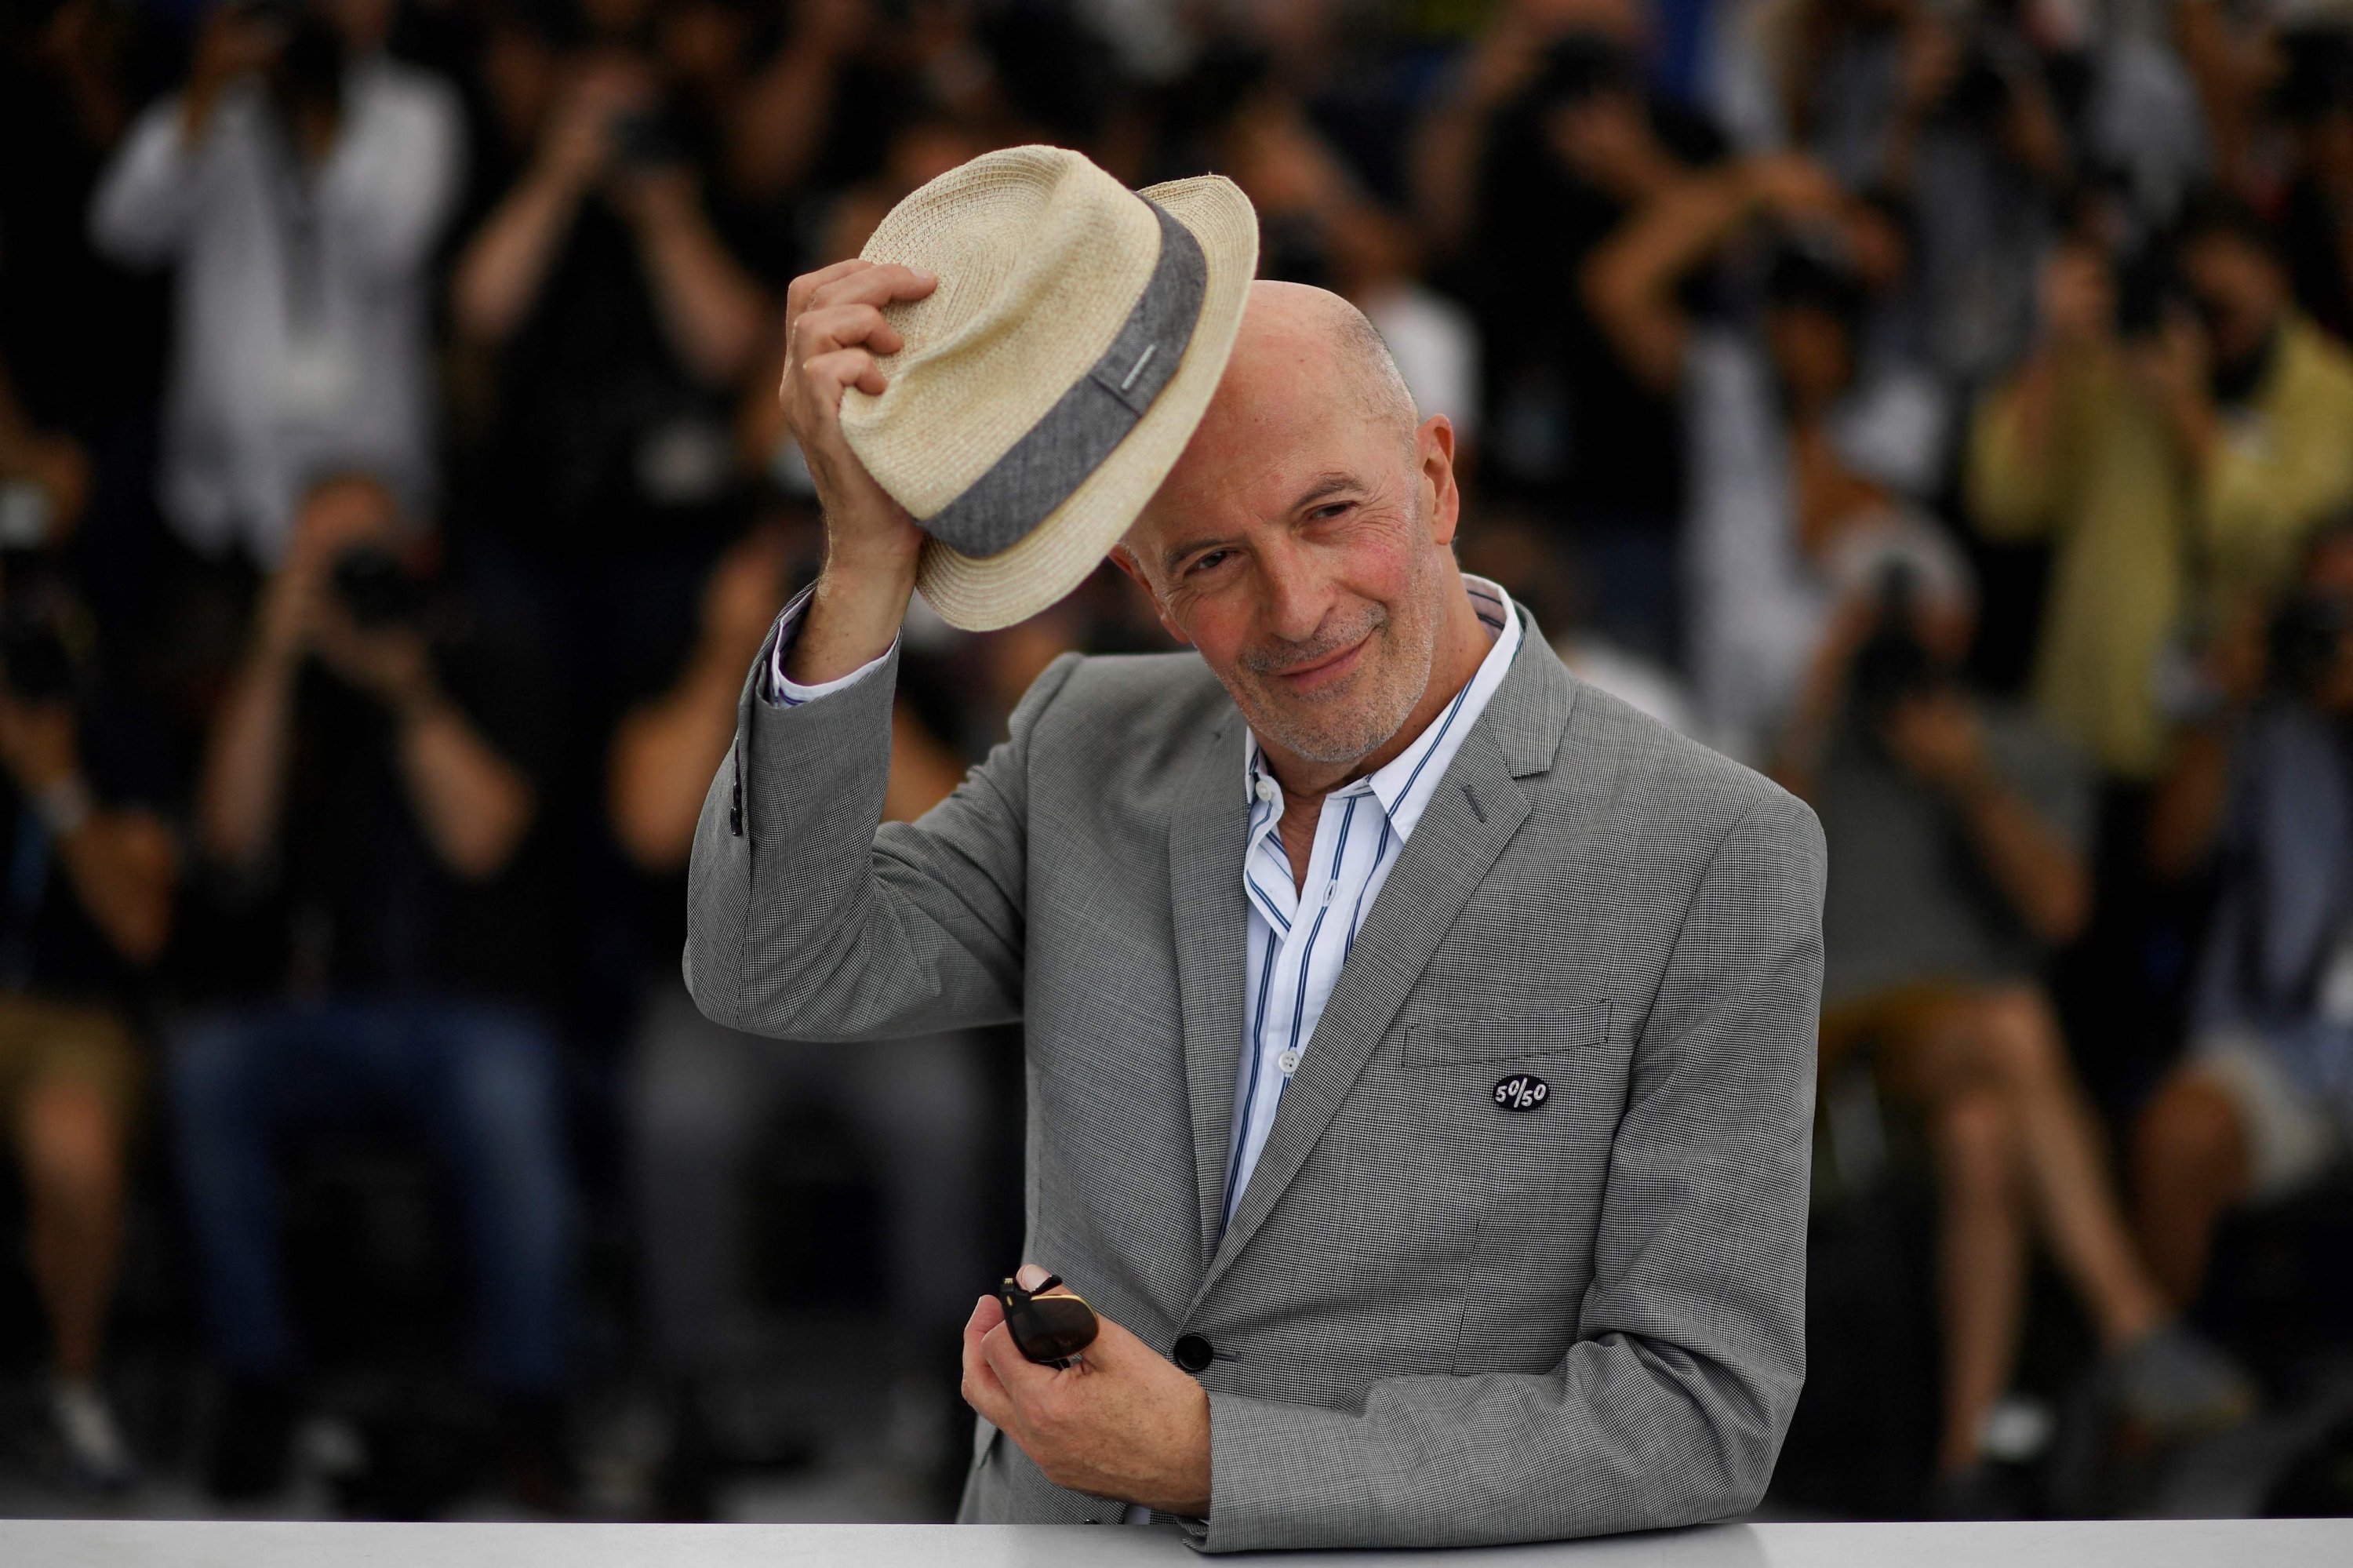 French director Jacques Audiard poses during a photocall for the film "Les Olympiades" (Paris 13th District) at the 74th edition of the Cannes Film Festival in Cannes, southern France, July 15, 2021. (AFP Photo)